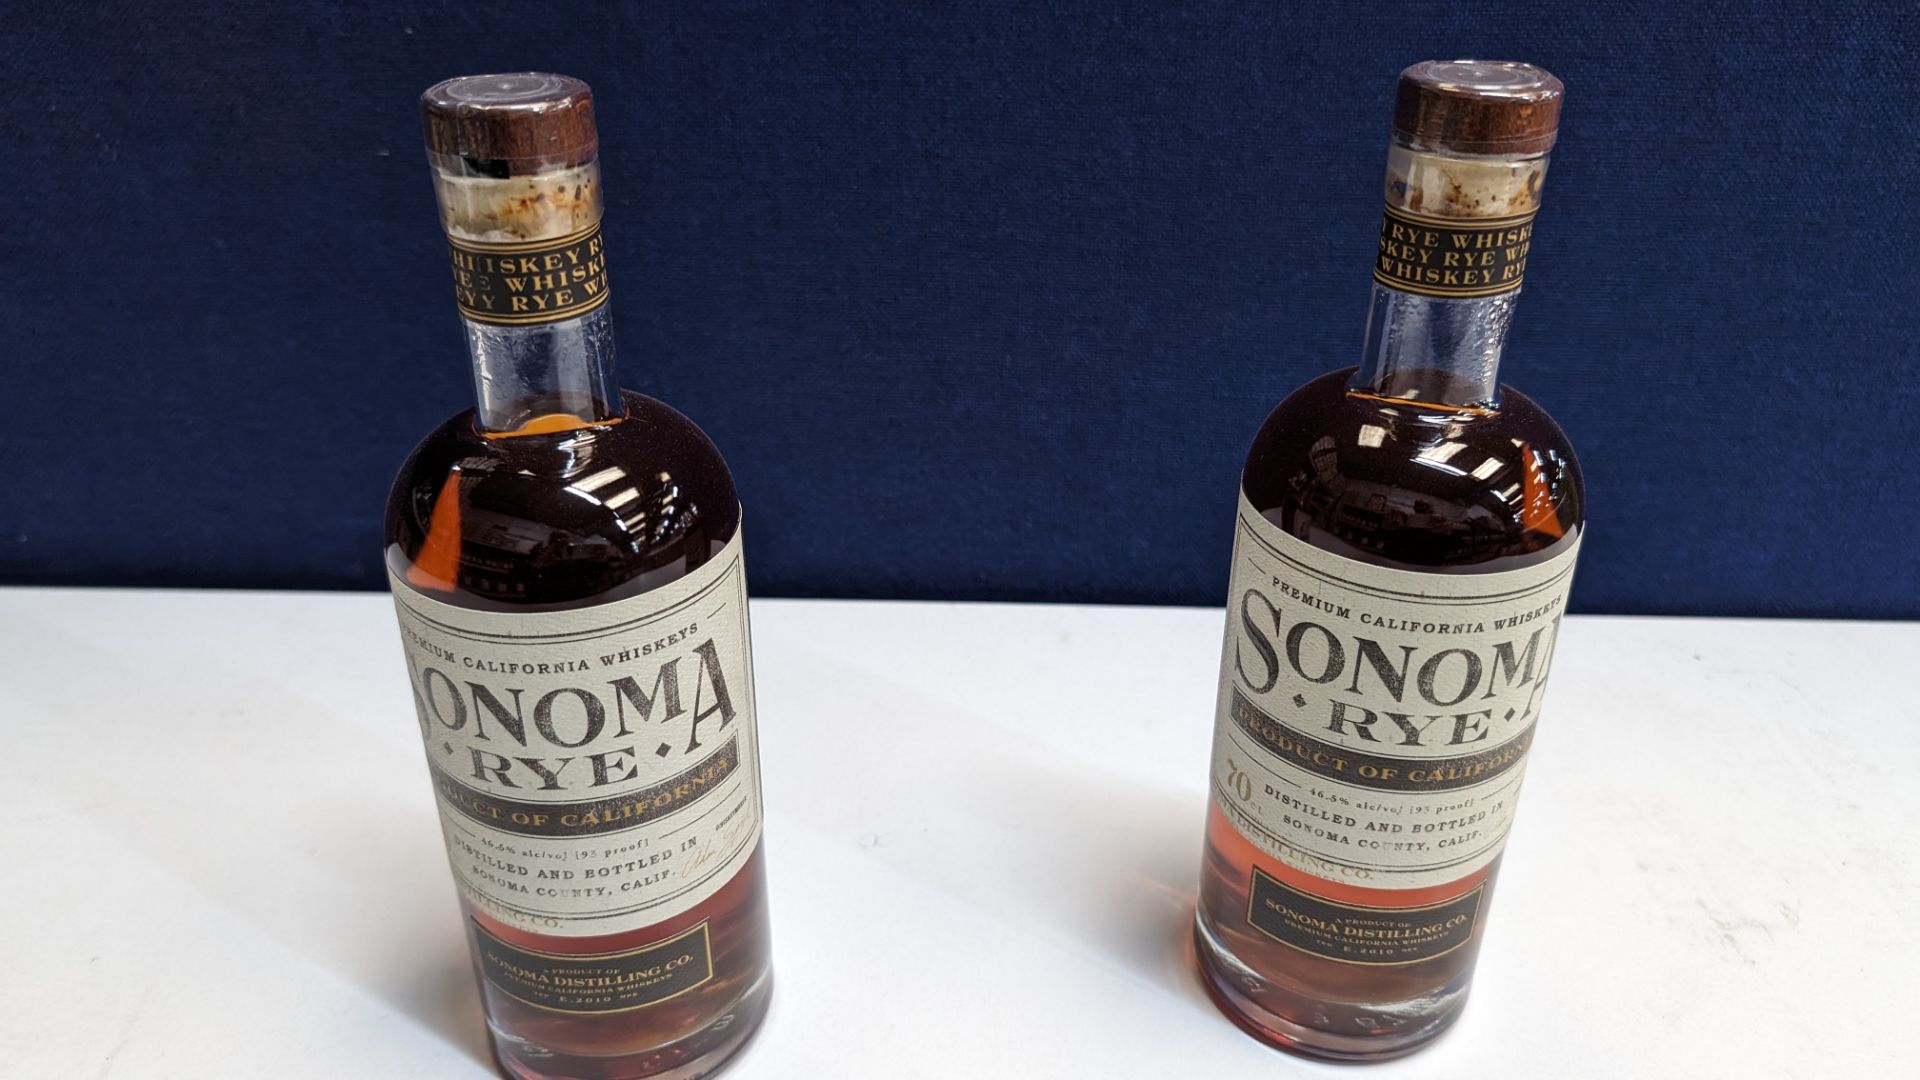 2 off 700ml bottles of Sonoma Rye Whiskey. 46.5% alc/vol (93 proof). Distilled and bottled in Sono